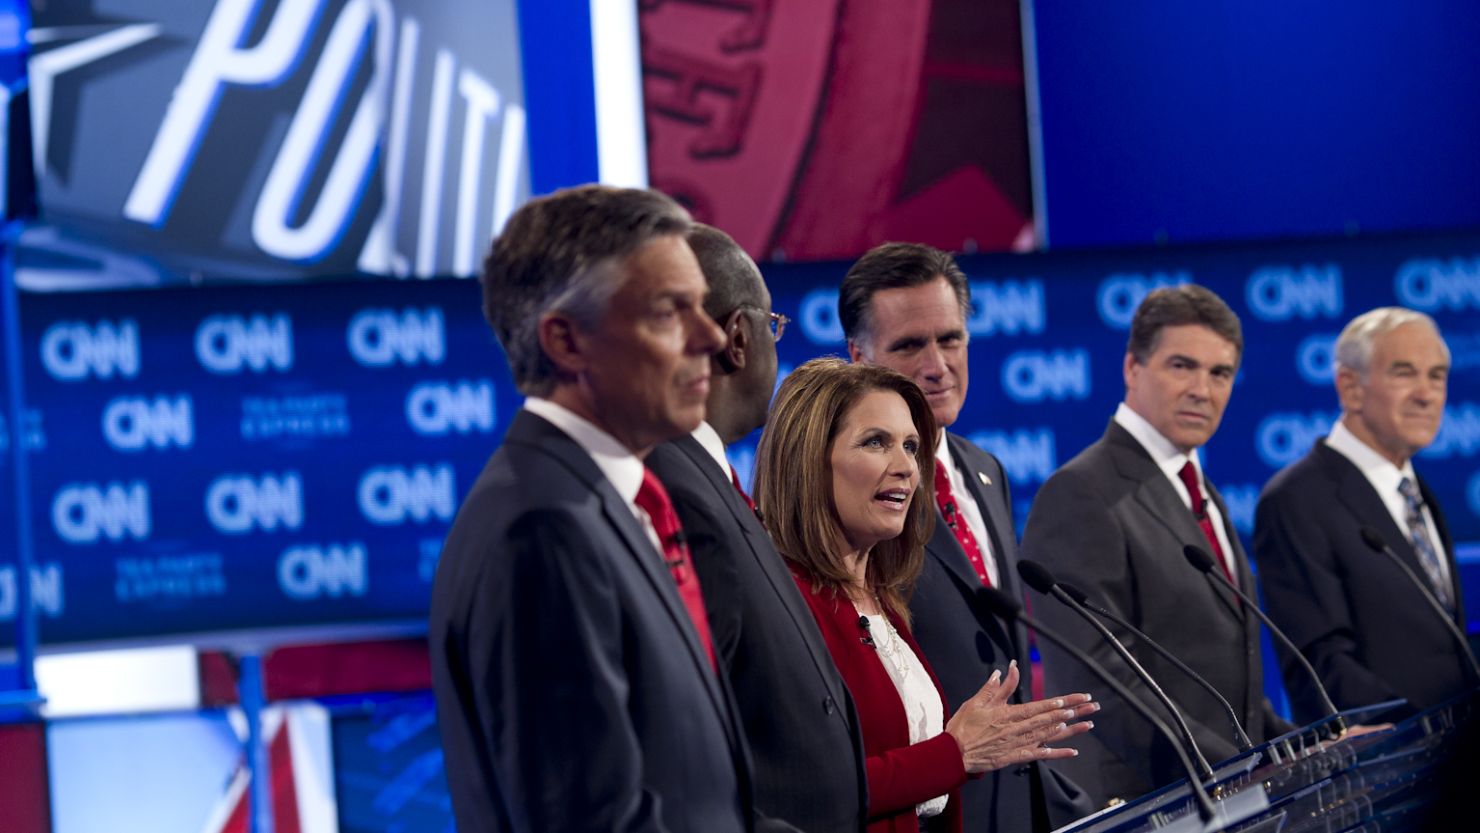 GOP presidential candidates faced questions on immigration at the CNN Tea Party/Republican debate  September 12th